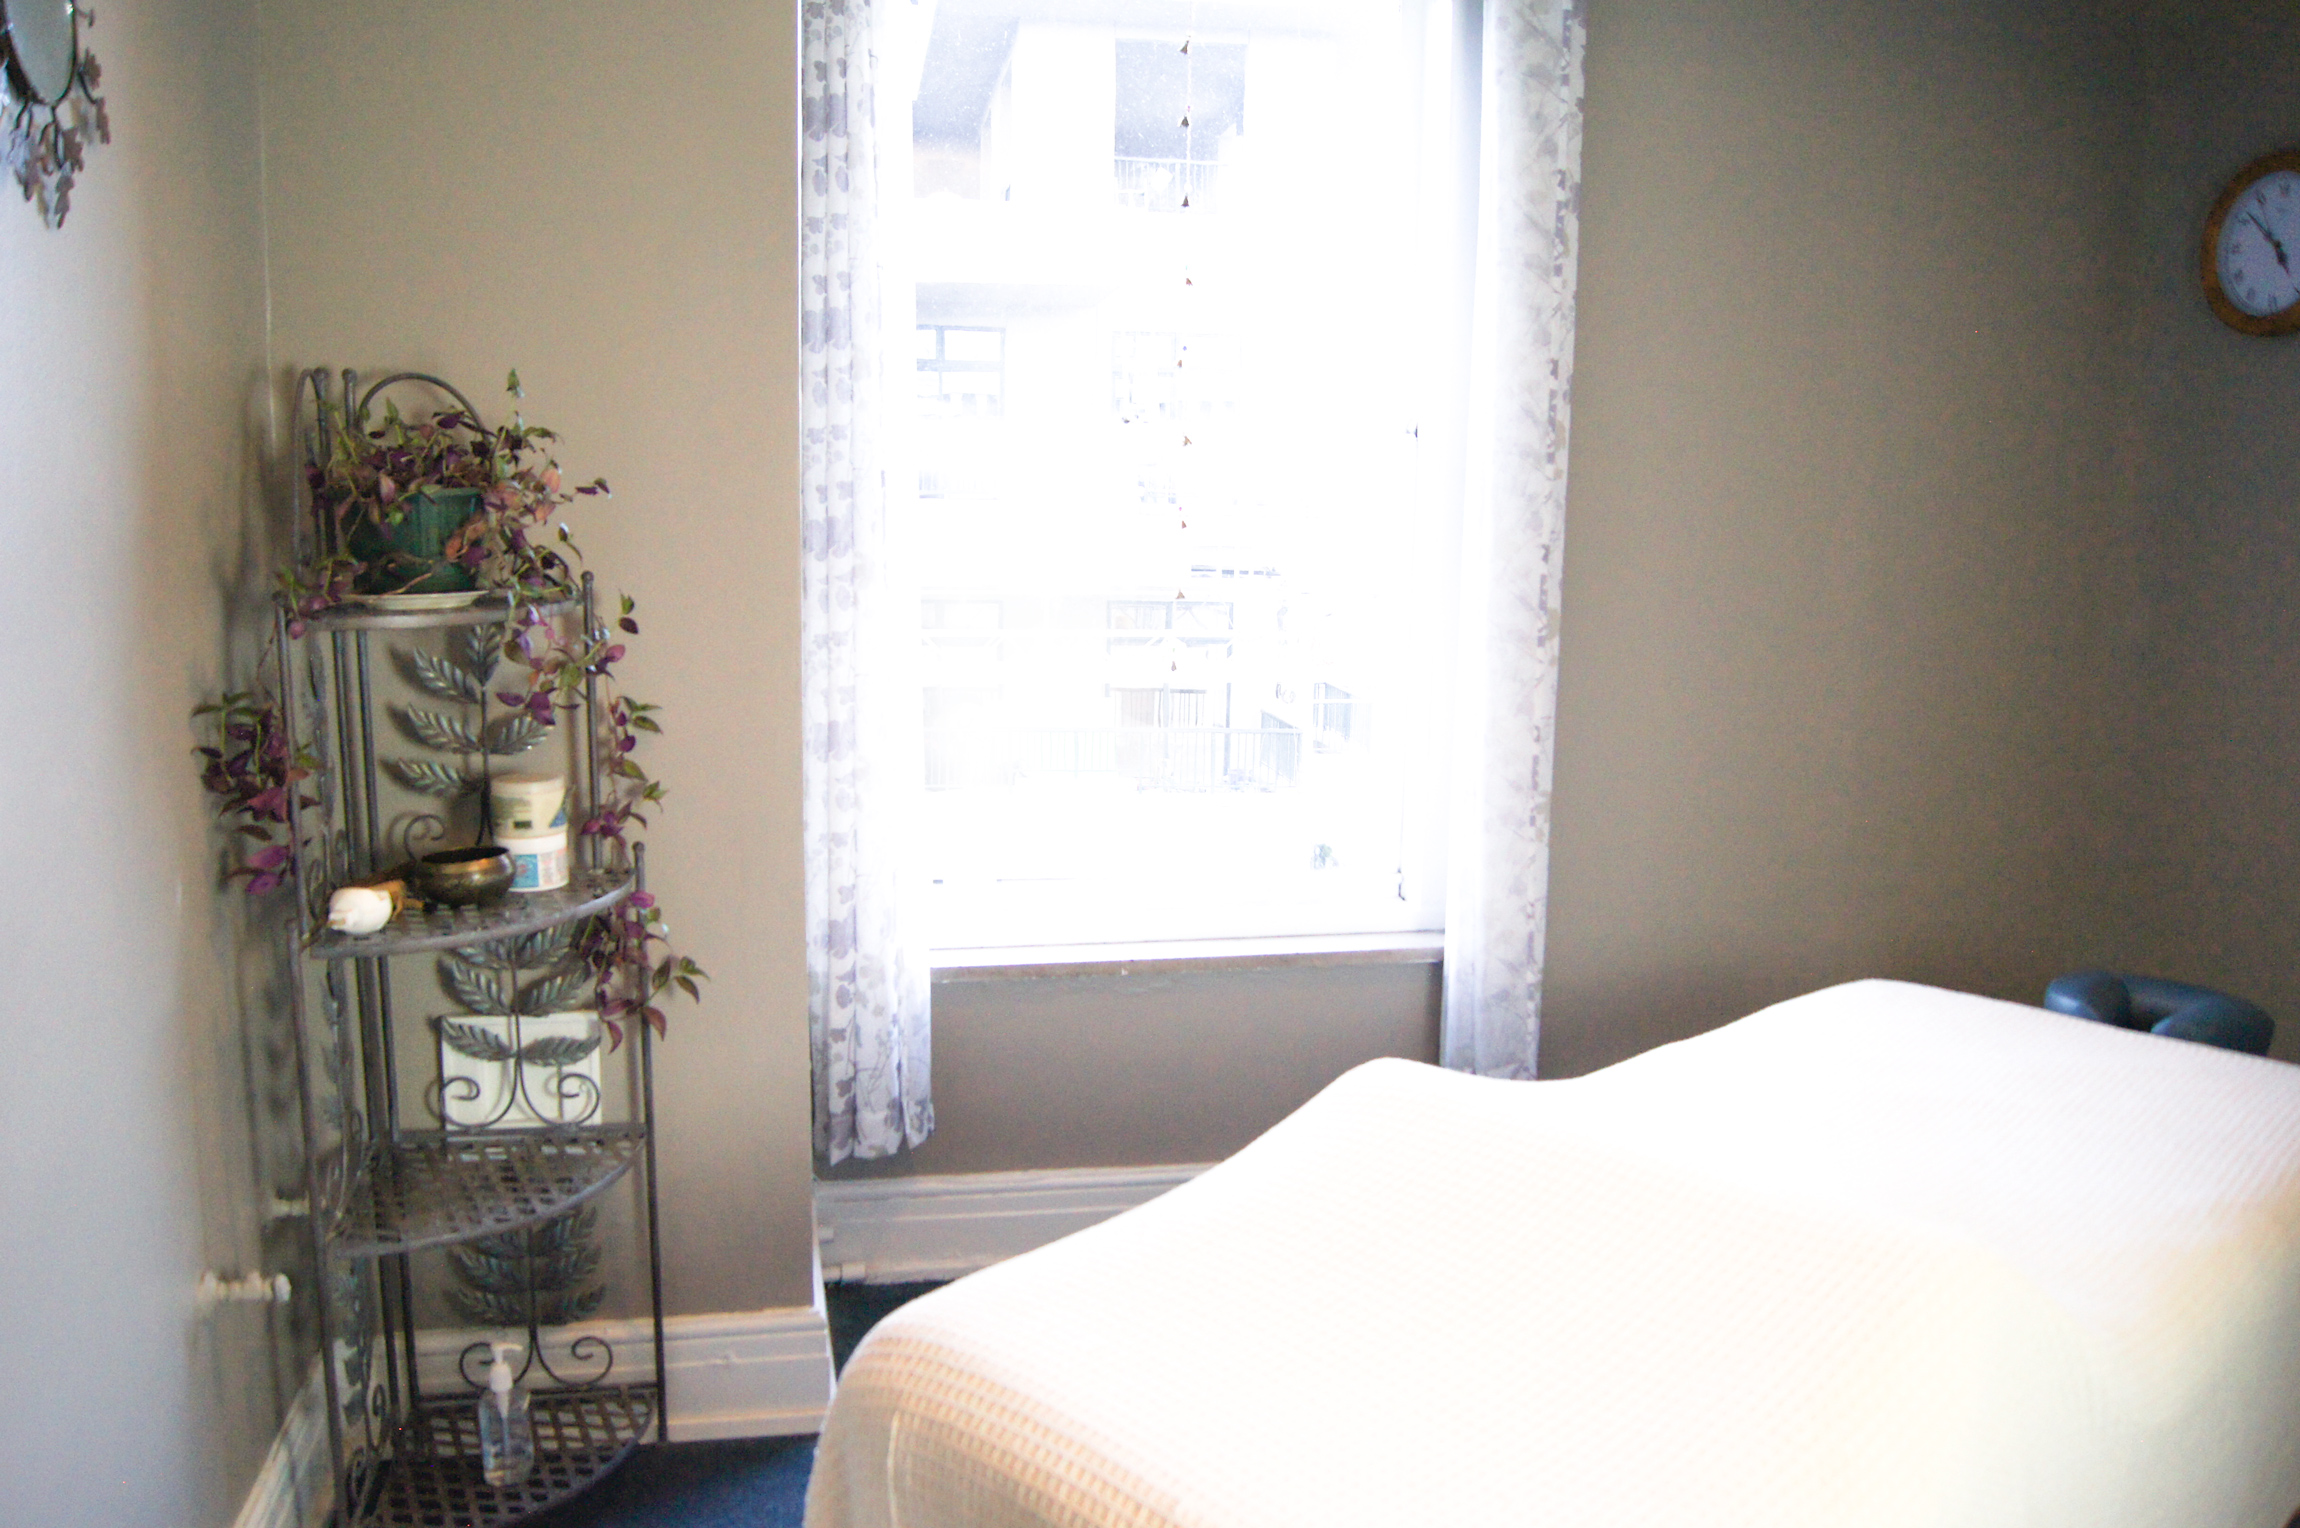 Therapeutic Massage Room with window